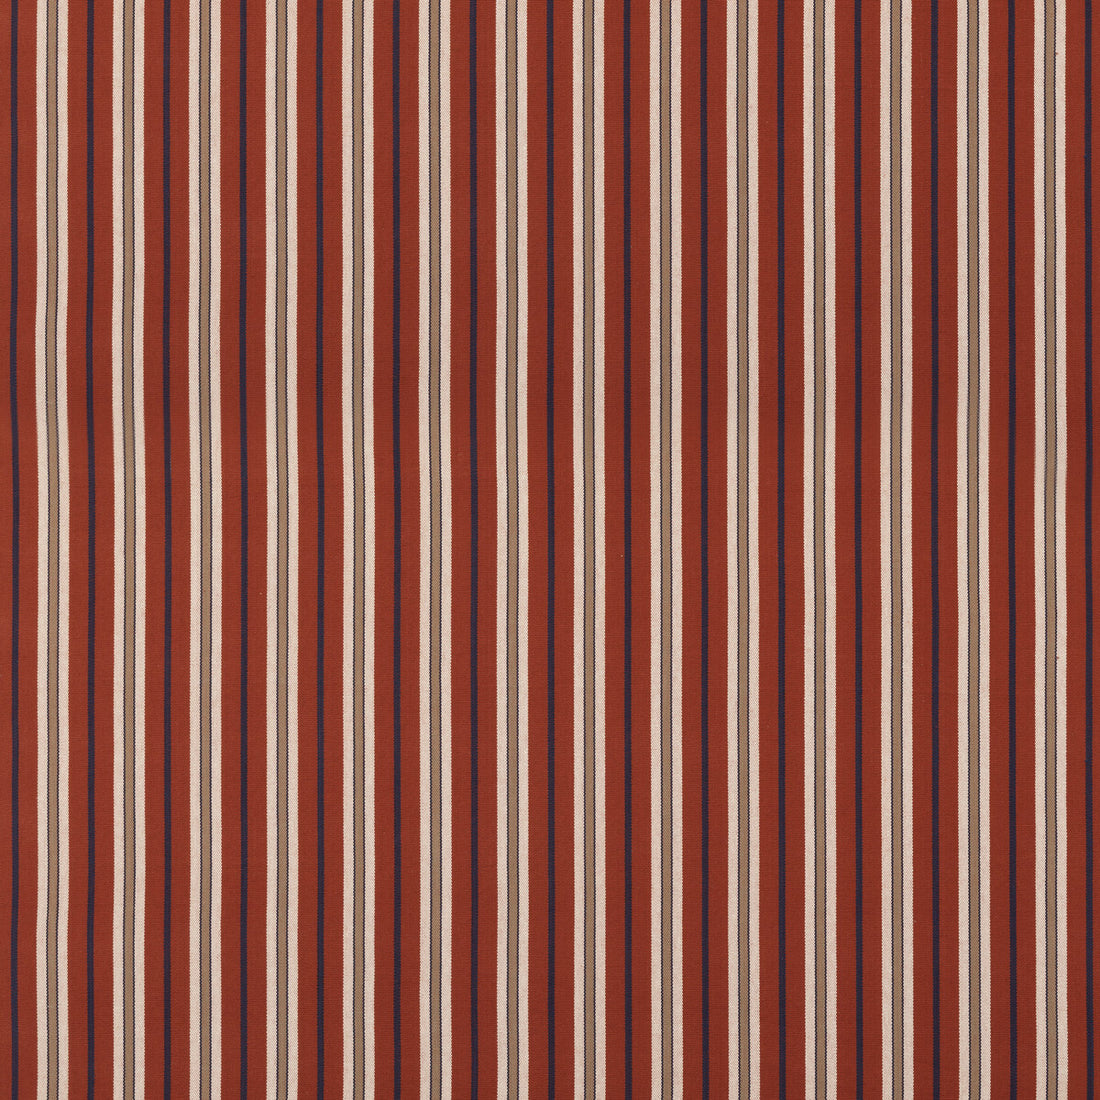 Starboard Stripe fabric in red/indigo color - pattern FD828.V110.0 - by Mulberry in the Westerly Stripes collection